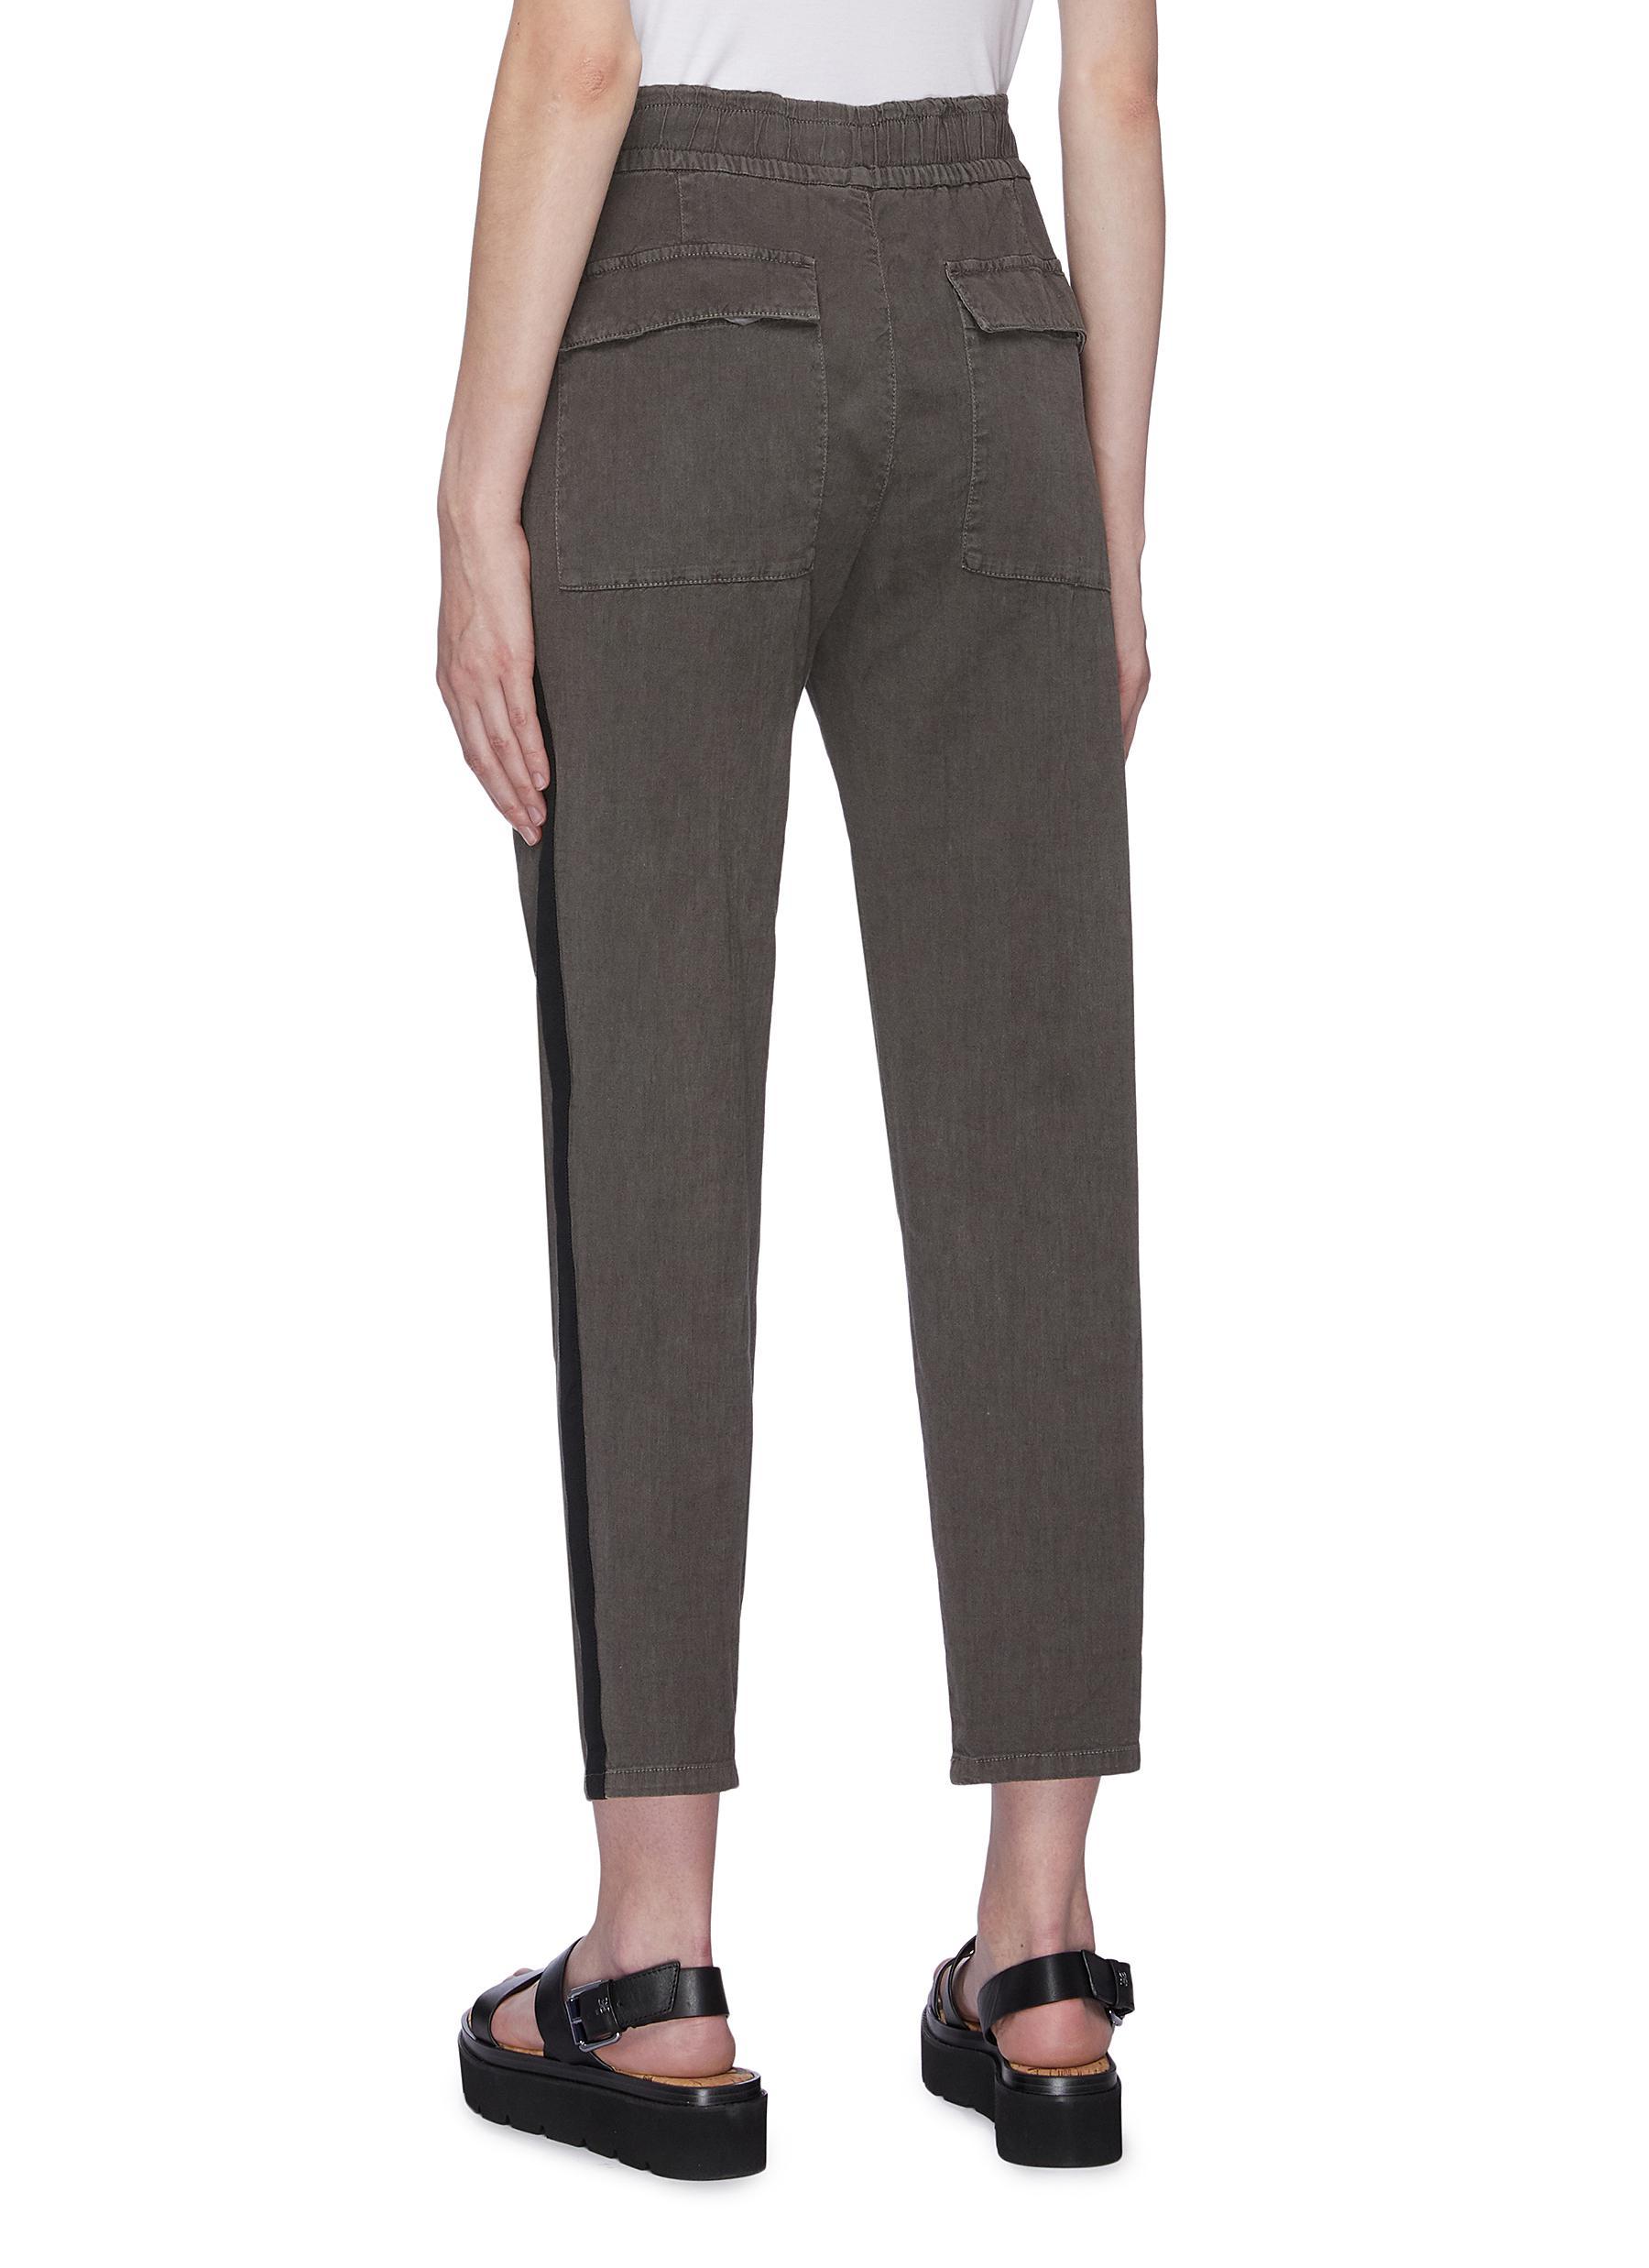 James Perse Stripe Outseam Cotton-linen jogging Pants in Green - Lyst